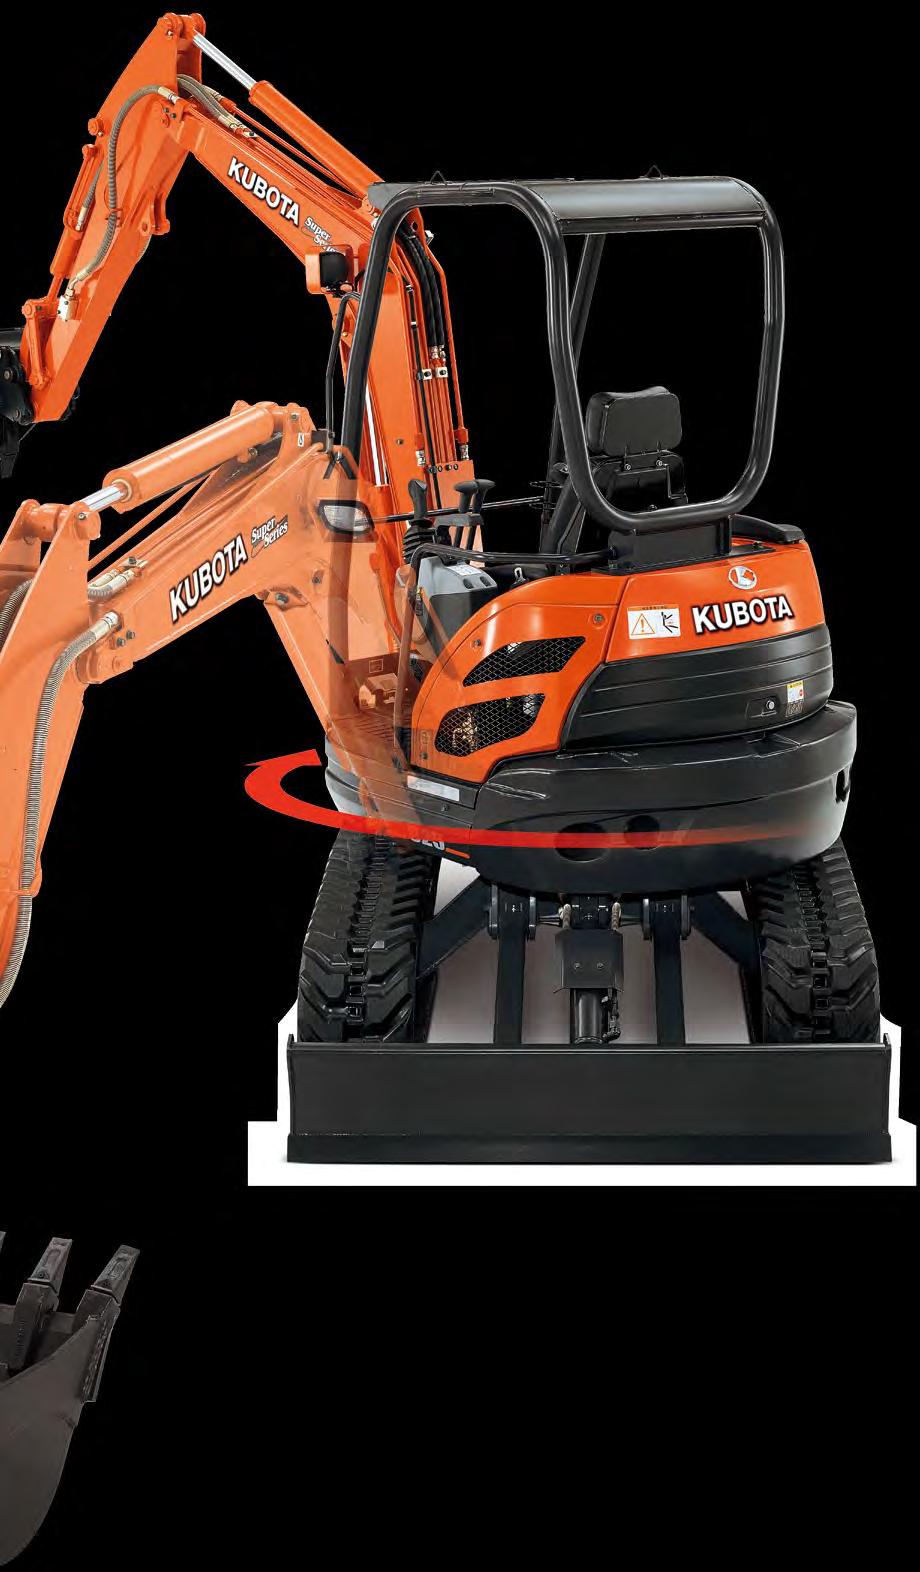 igital panel Kubota s Intelligent ontrol System can help reduce downtime and repair fees by providing timely